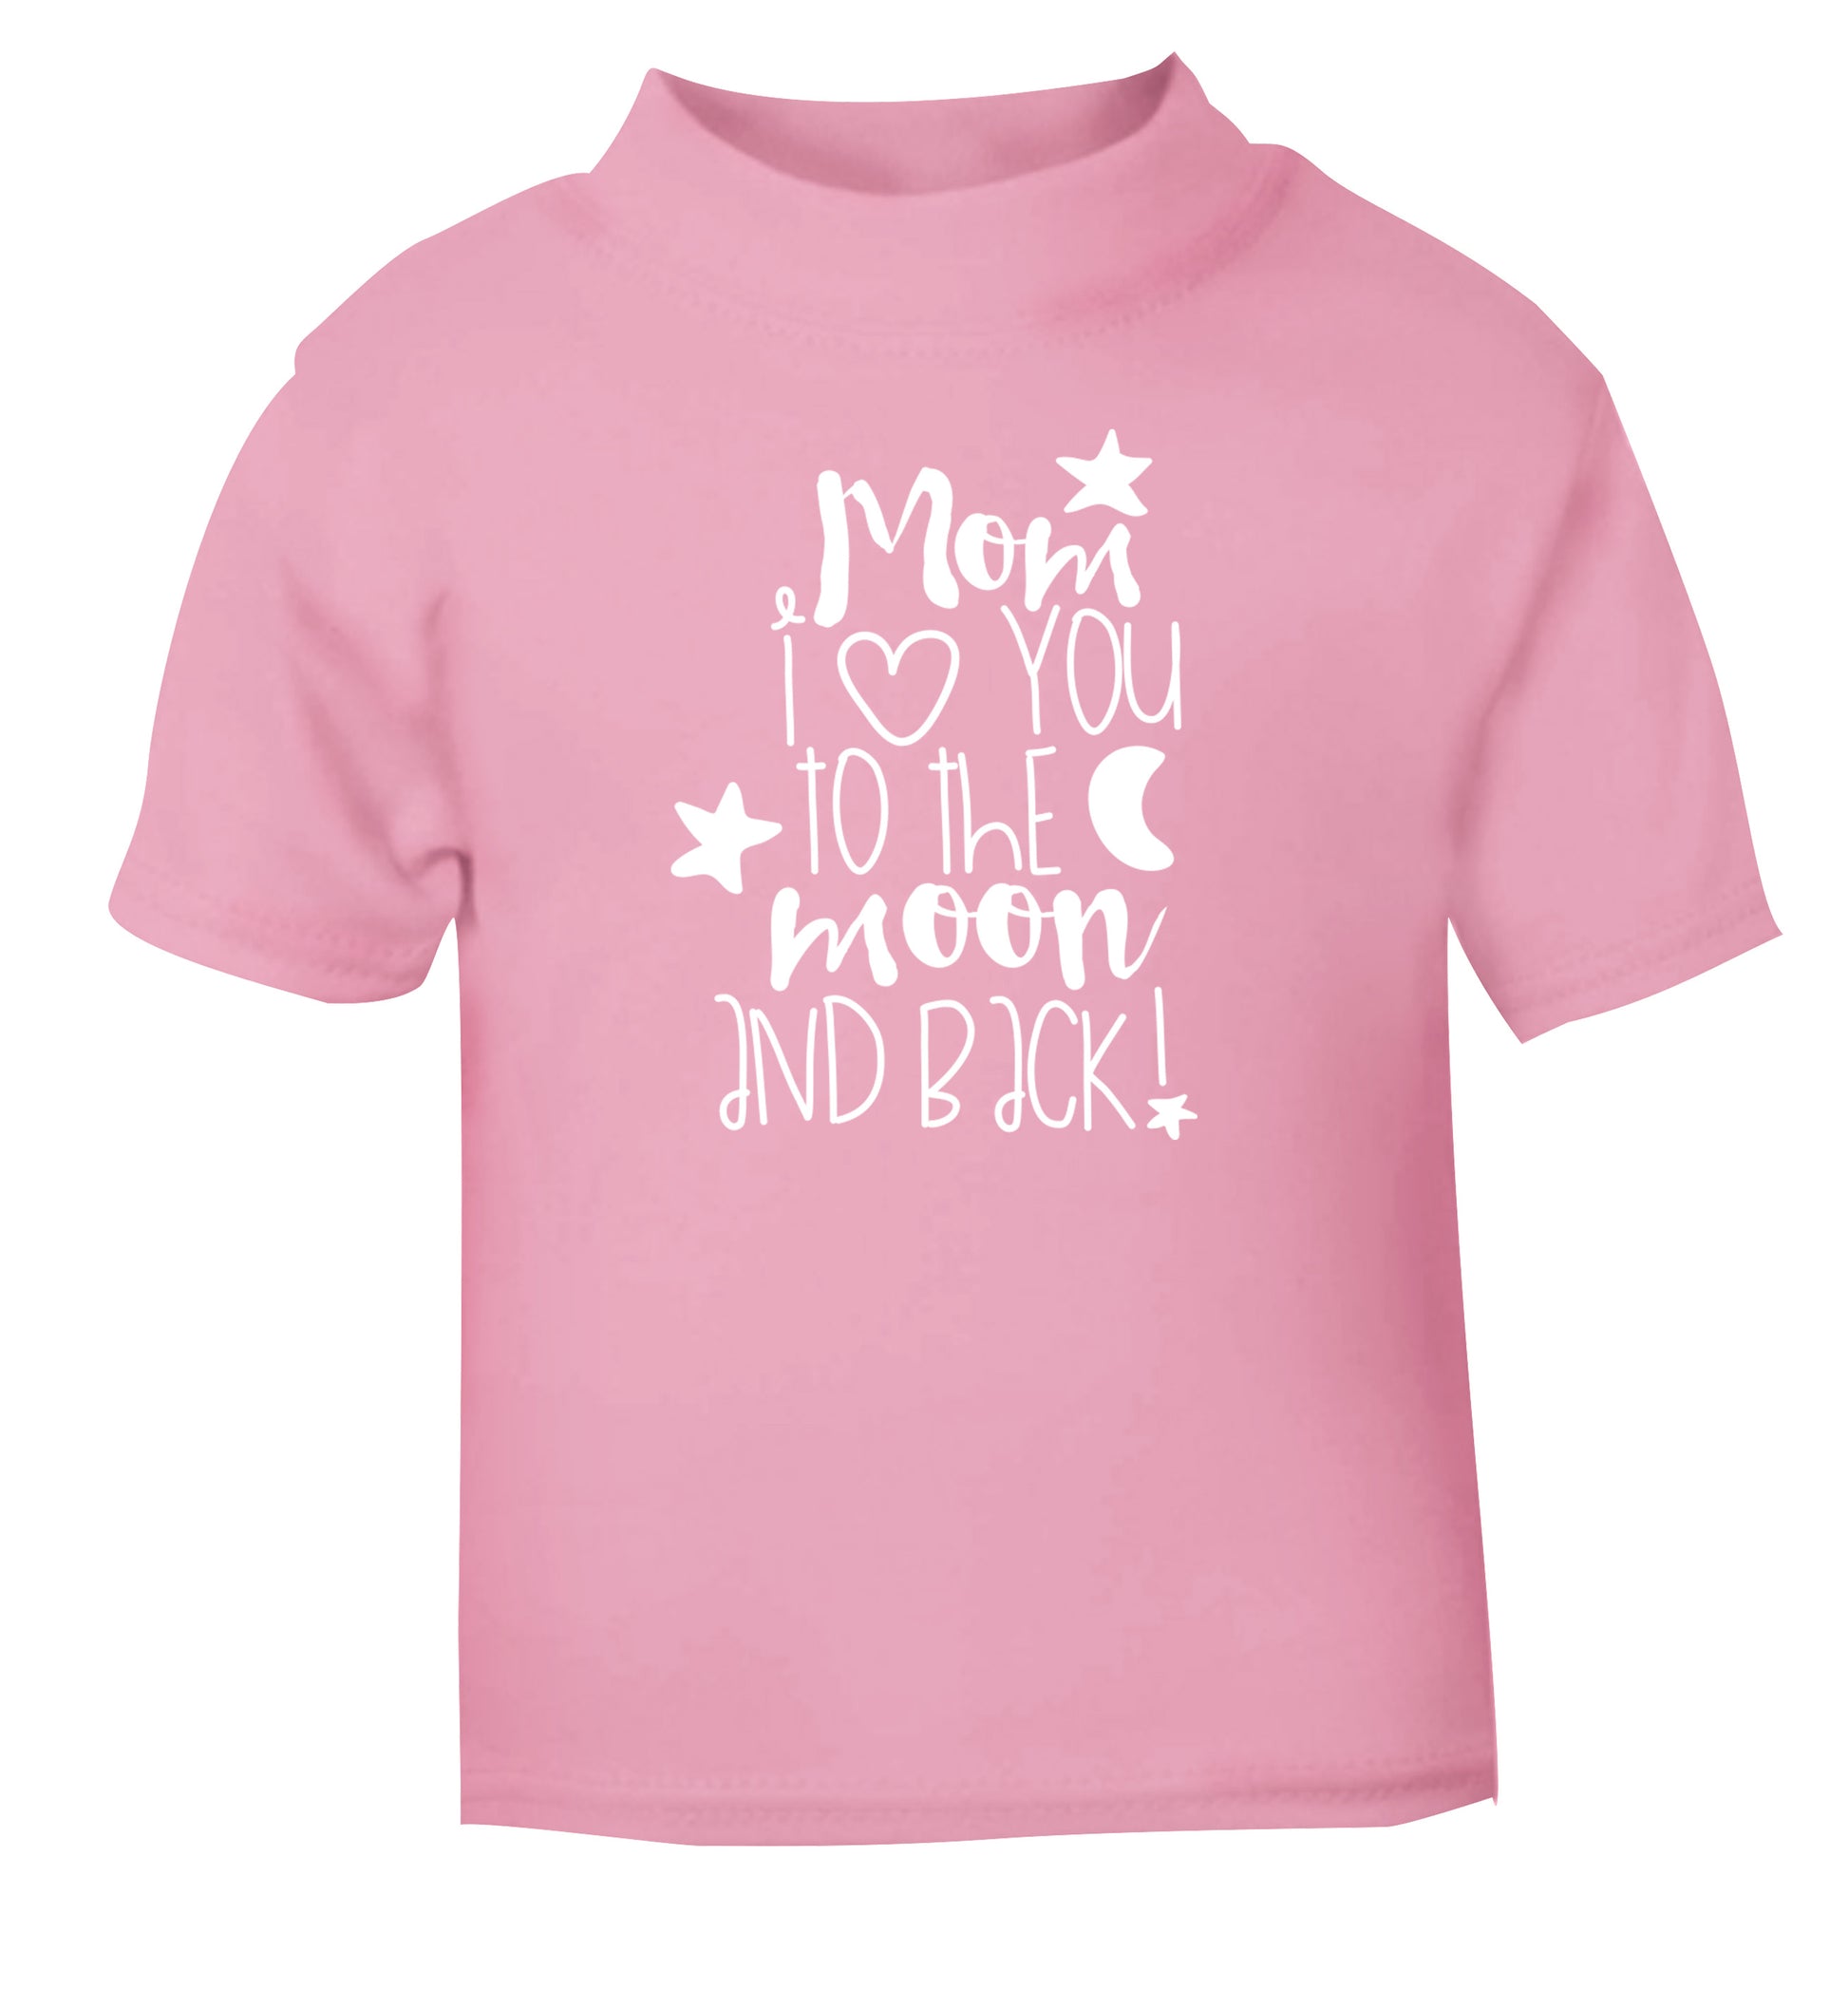 Mom I love you to the moon and back light pink baby toddler Tshirt 2 Years